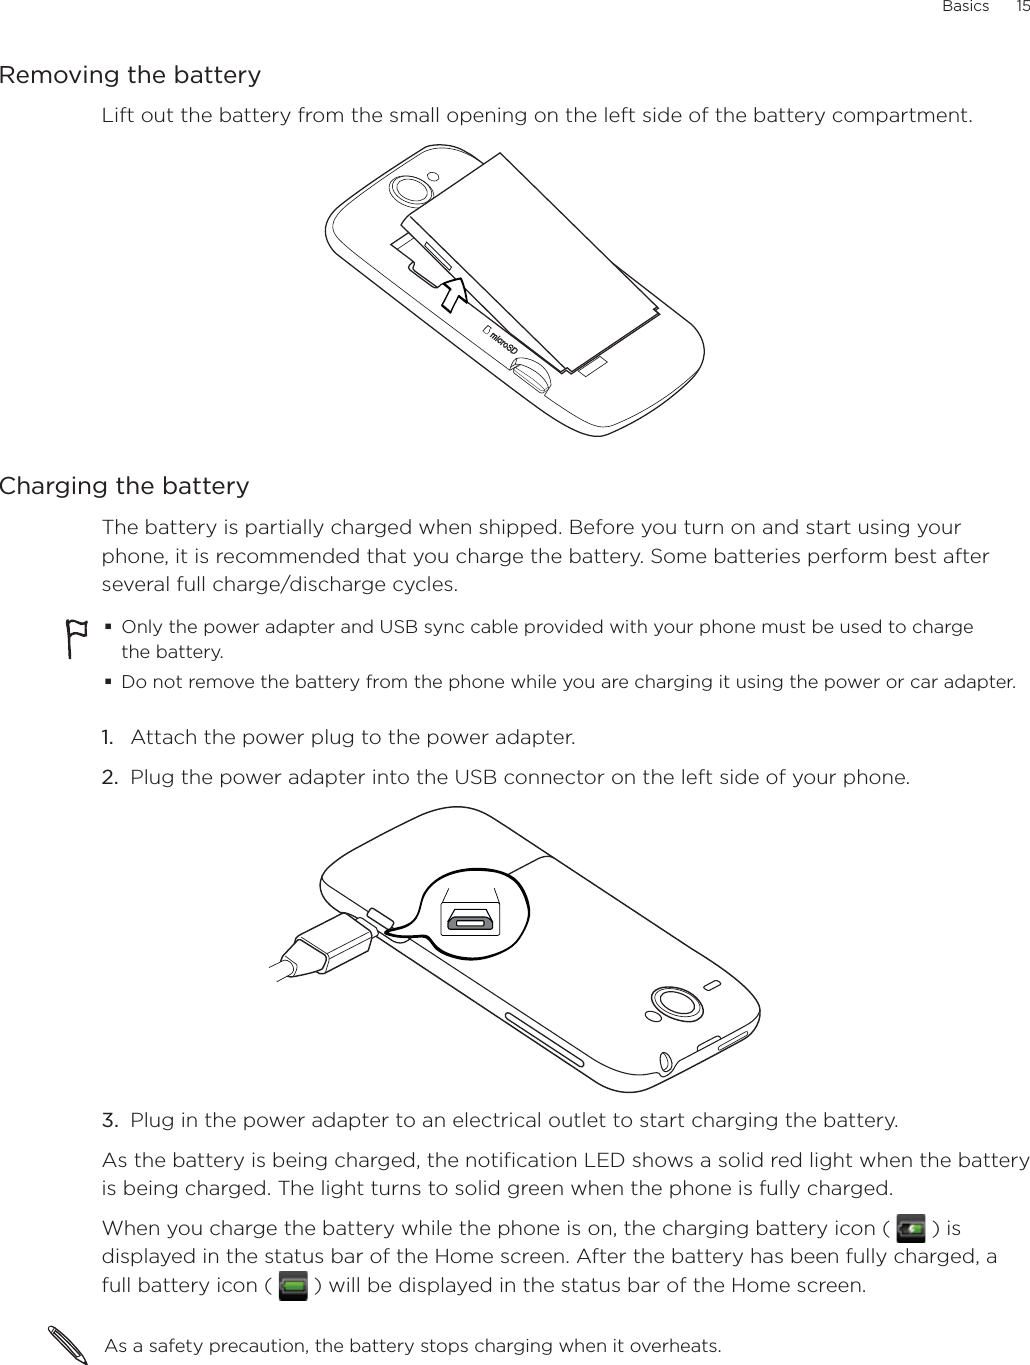 Basics      15Removing the batteryLift out the battery from the small opening on the left side of the battery compartment.Charging the batteryThe battery is partially charged when shipped. Before you turn on and start using your phone, it is recommended that you charge the battery. Some batteries perform best after several full charge/discharge cycles.Only the power adapter and USB sync cable provided with your phone must be used to charge the battery.Do not remove the battery from the phone while you are charging it using the power or car adapter.1.  Attach the power plug to the power adapter.2.  Plug the power adapter into the USB connector on the left side of your phone.3.  Plug in the power adapter to an electrical outlet to start charging the battery.As the battery is being charged, the notification LED shows a solid red light when the battery is being charged. The light turns to solid green when the phone is fully charged.When you charge the battery while the phone is on, the charging battery icon (   ) is displayed in the status bar of the Home screen. After the battery has been fully charged, a full battery icon (   ) will be displayed in the status bar of the Home screen.As a safety precaution, the battery stops charging when it overheats. 